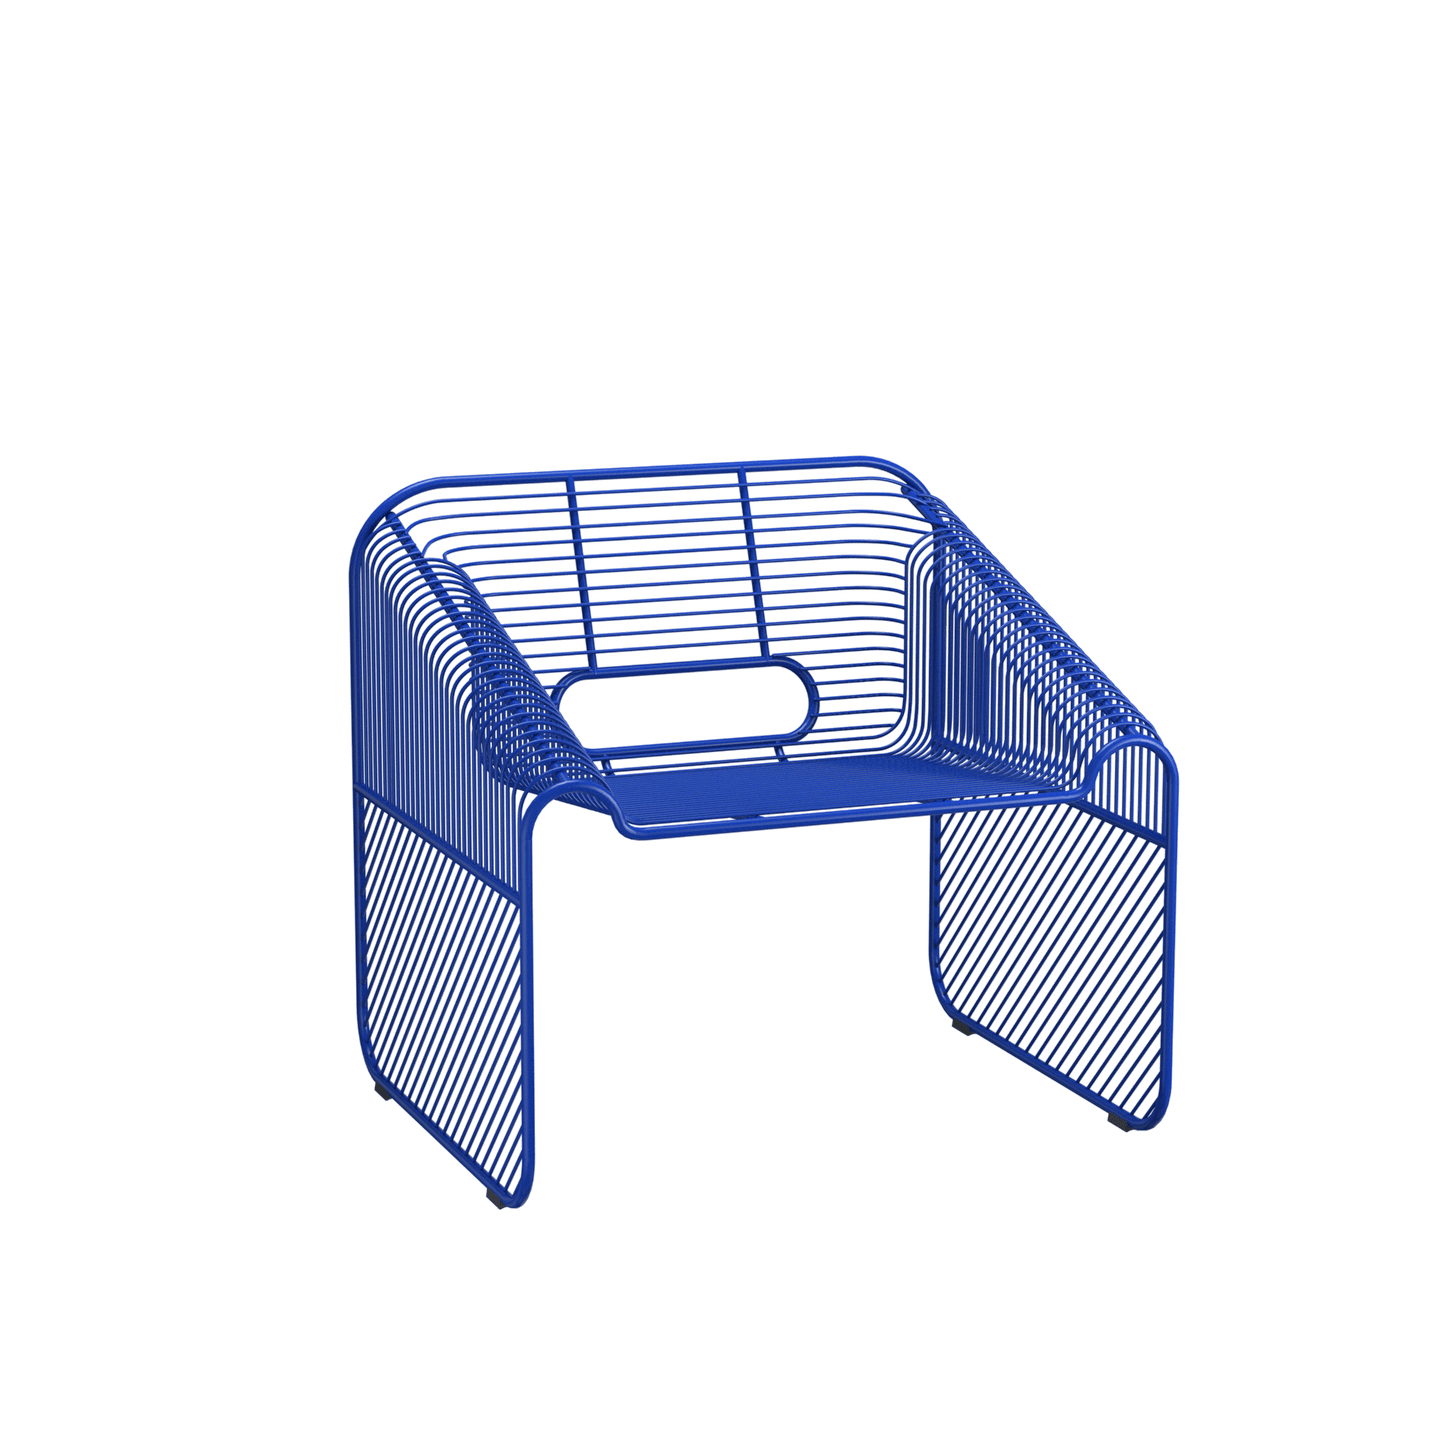 Load image into Gallery viewer, Hot Seat Electric BlueLounge Chair Bend Goods  Electric Blue   Four Hands, Mid Century Modern Furniture, Old Bones Furniture Company, Old Bones Co, Modern Mid Century, Designer Furniture, https://www.oldbonesco.com/
